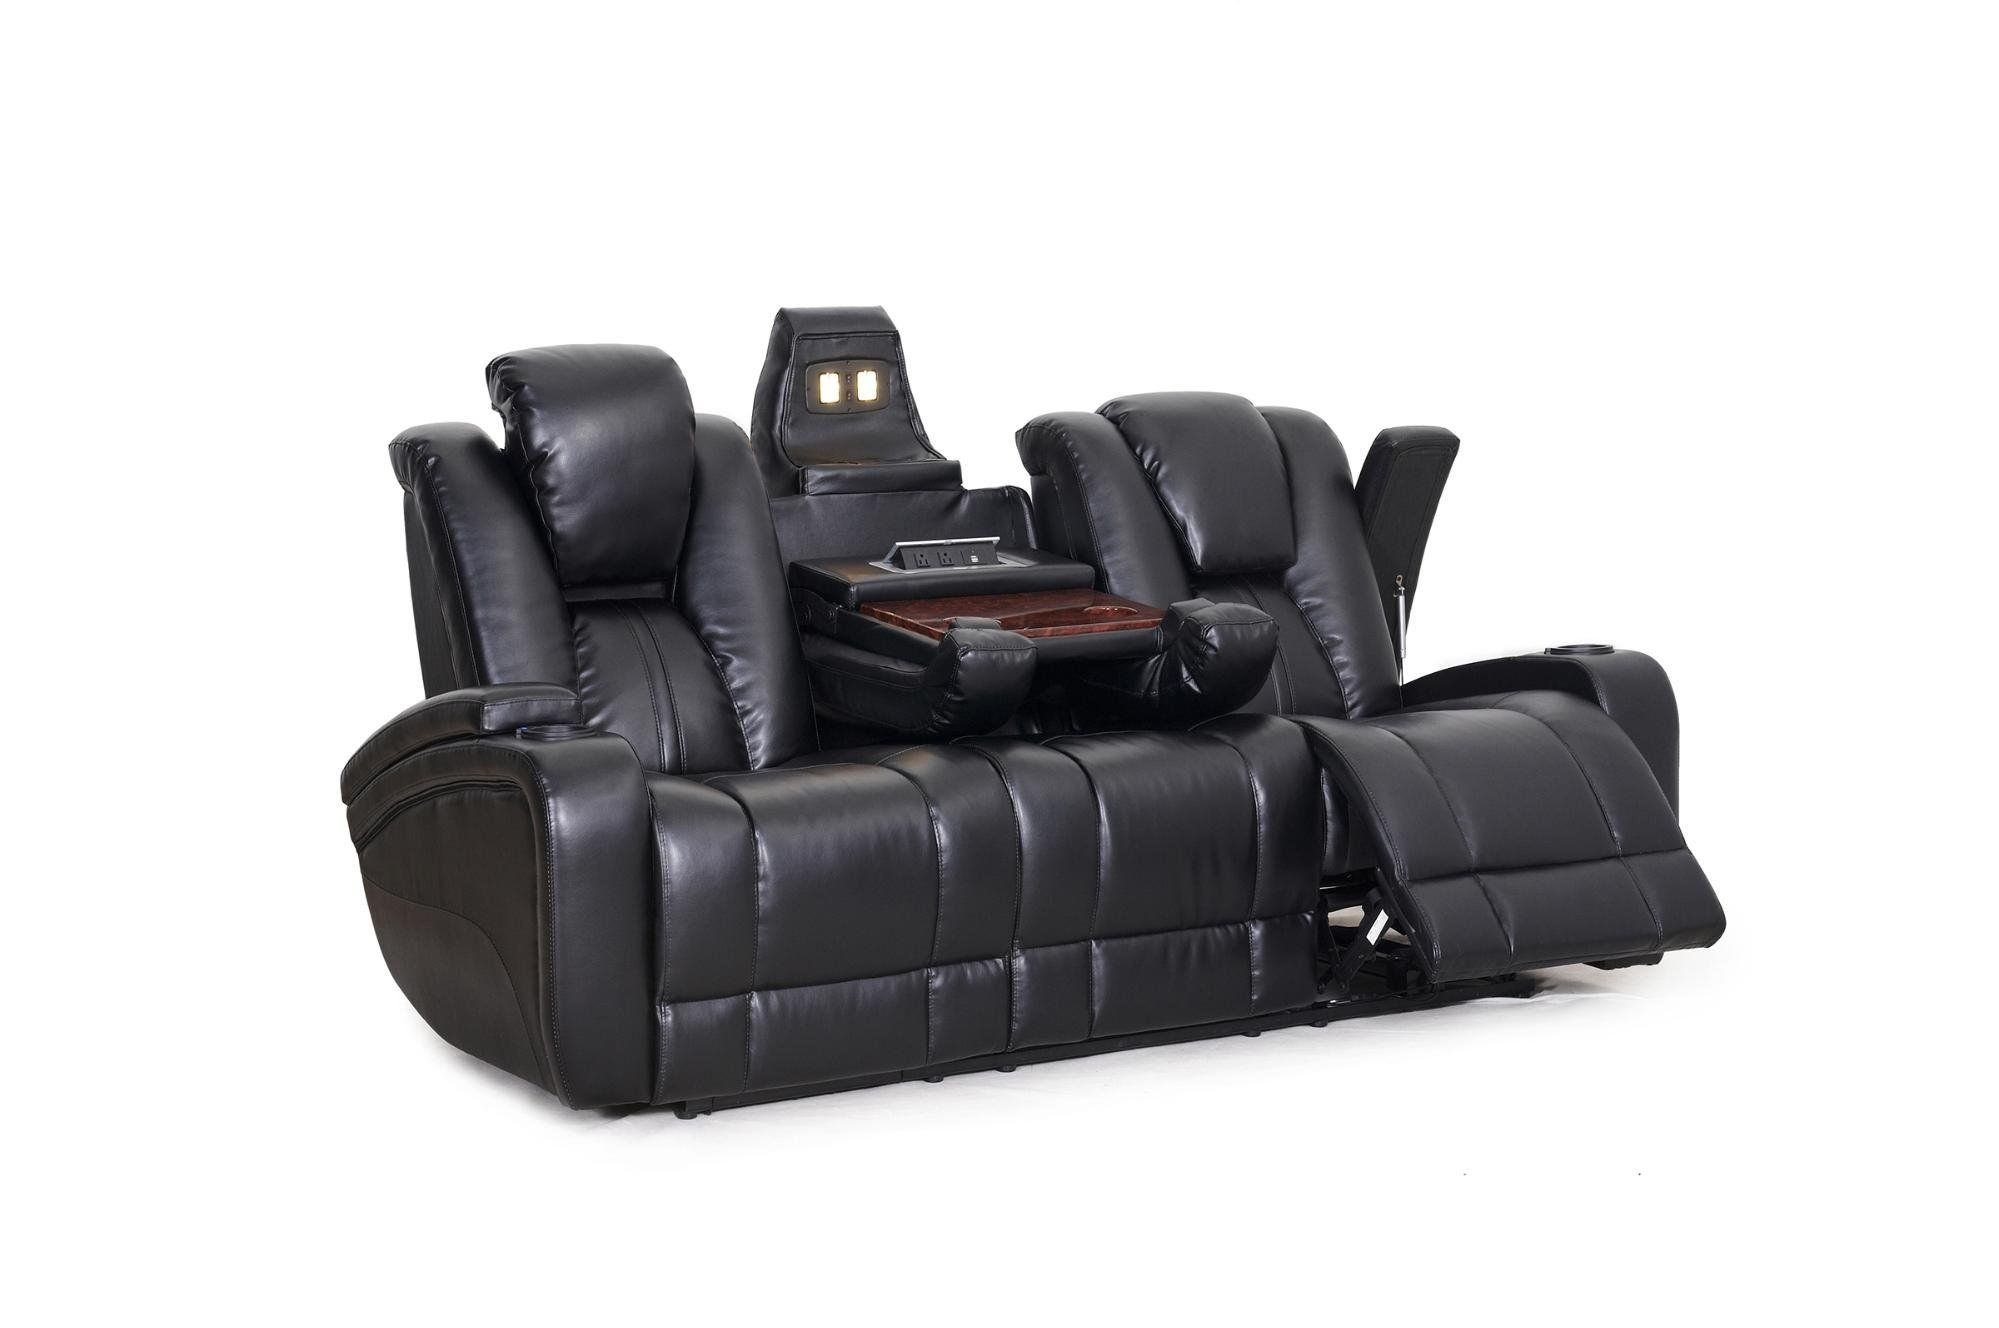 SeatCraft Transformer Reclining Sofa with Power and Drop Down Table, Black